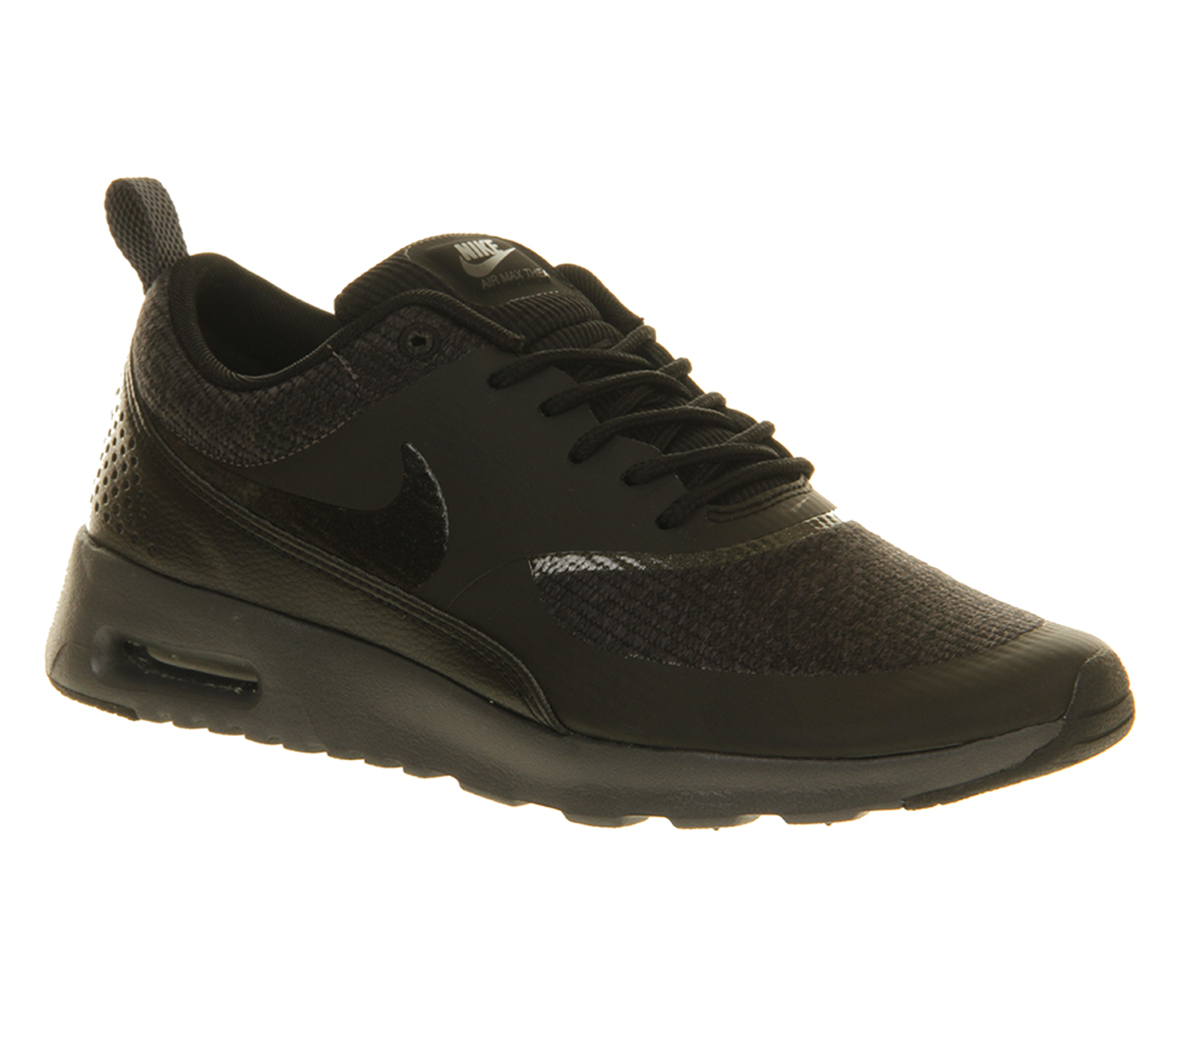 nike theas all black Cheaper Than Retail Price> Buy Clothing, Accessories  and lifestyle products for women & men -